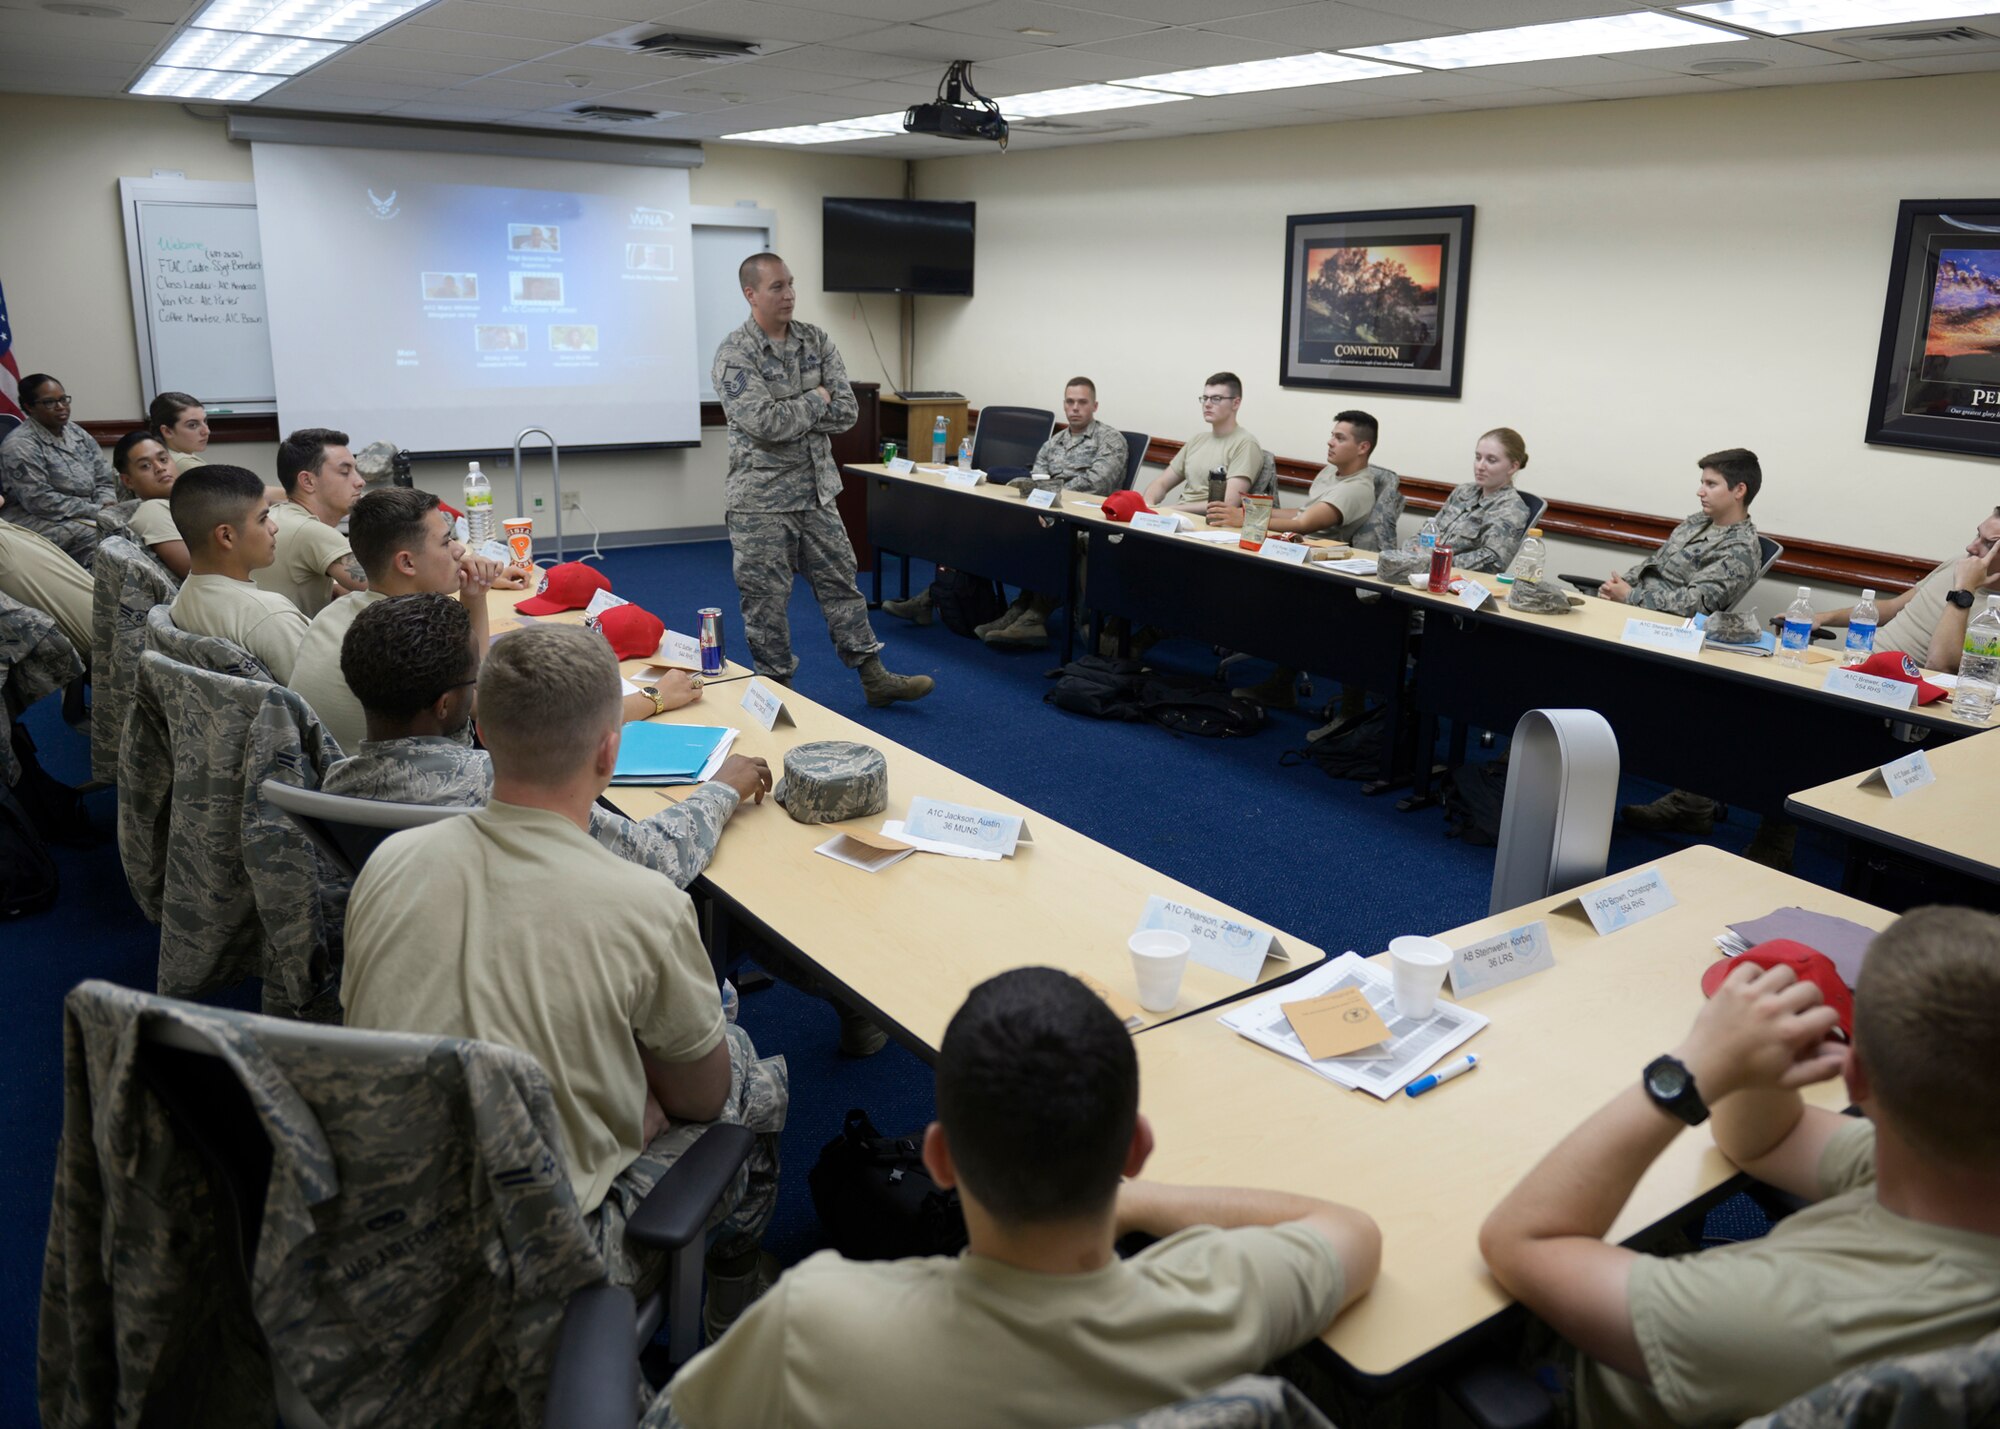 Students in the First Term Airmen’s Course listen as a briefer gives a lesson during Airmanship 300 June 7, 2017, at Andersen Air Force Base, Guam. This month, the Air Force transitioned from what used to be the First Term Airmen’s Center to Airmanship 300 which is the next step of professional development in an enlisted Airman’s developmental path. (U.S. Air Force photo by Senior Airman Cierra Presentado/Released)